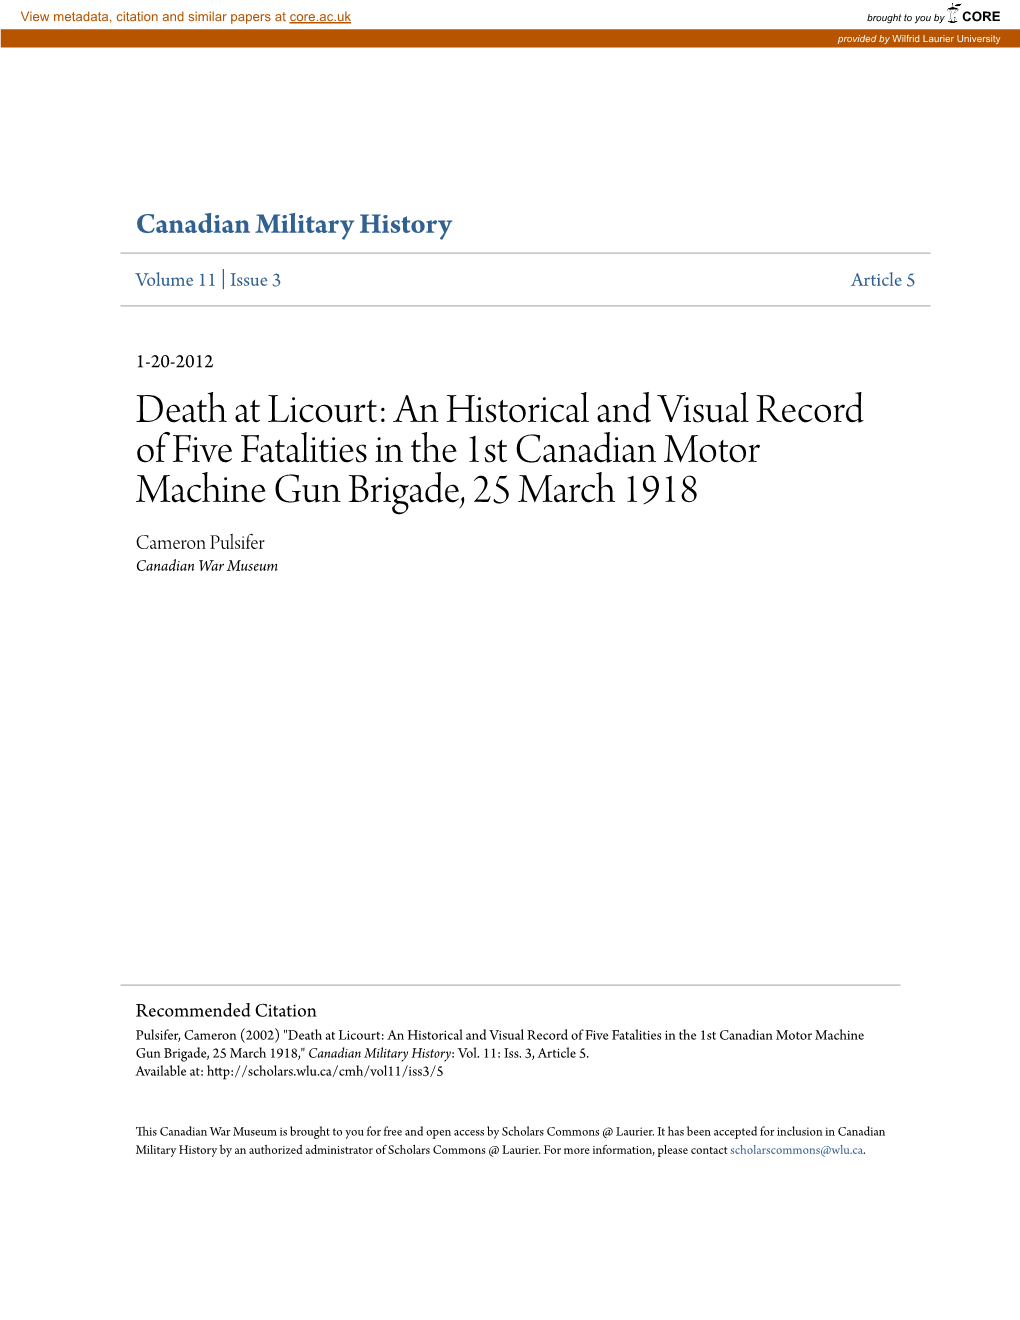 Death at Licourt: an Historical and Visual Record of Five Fatalities in the 1St Canadian Motor Machine Gun Brigade, 25 March 1918 Cameron Pulsifer Canadian War Museum